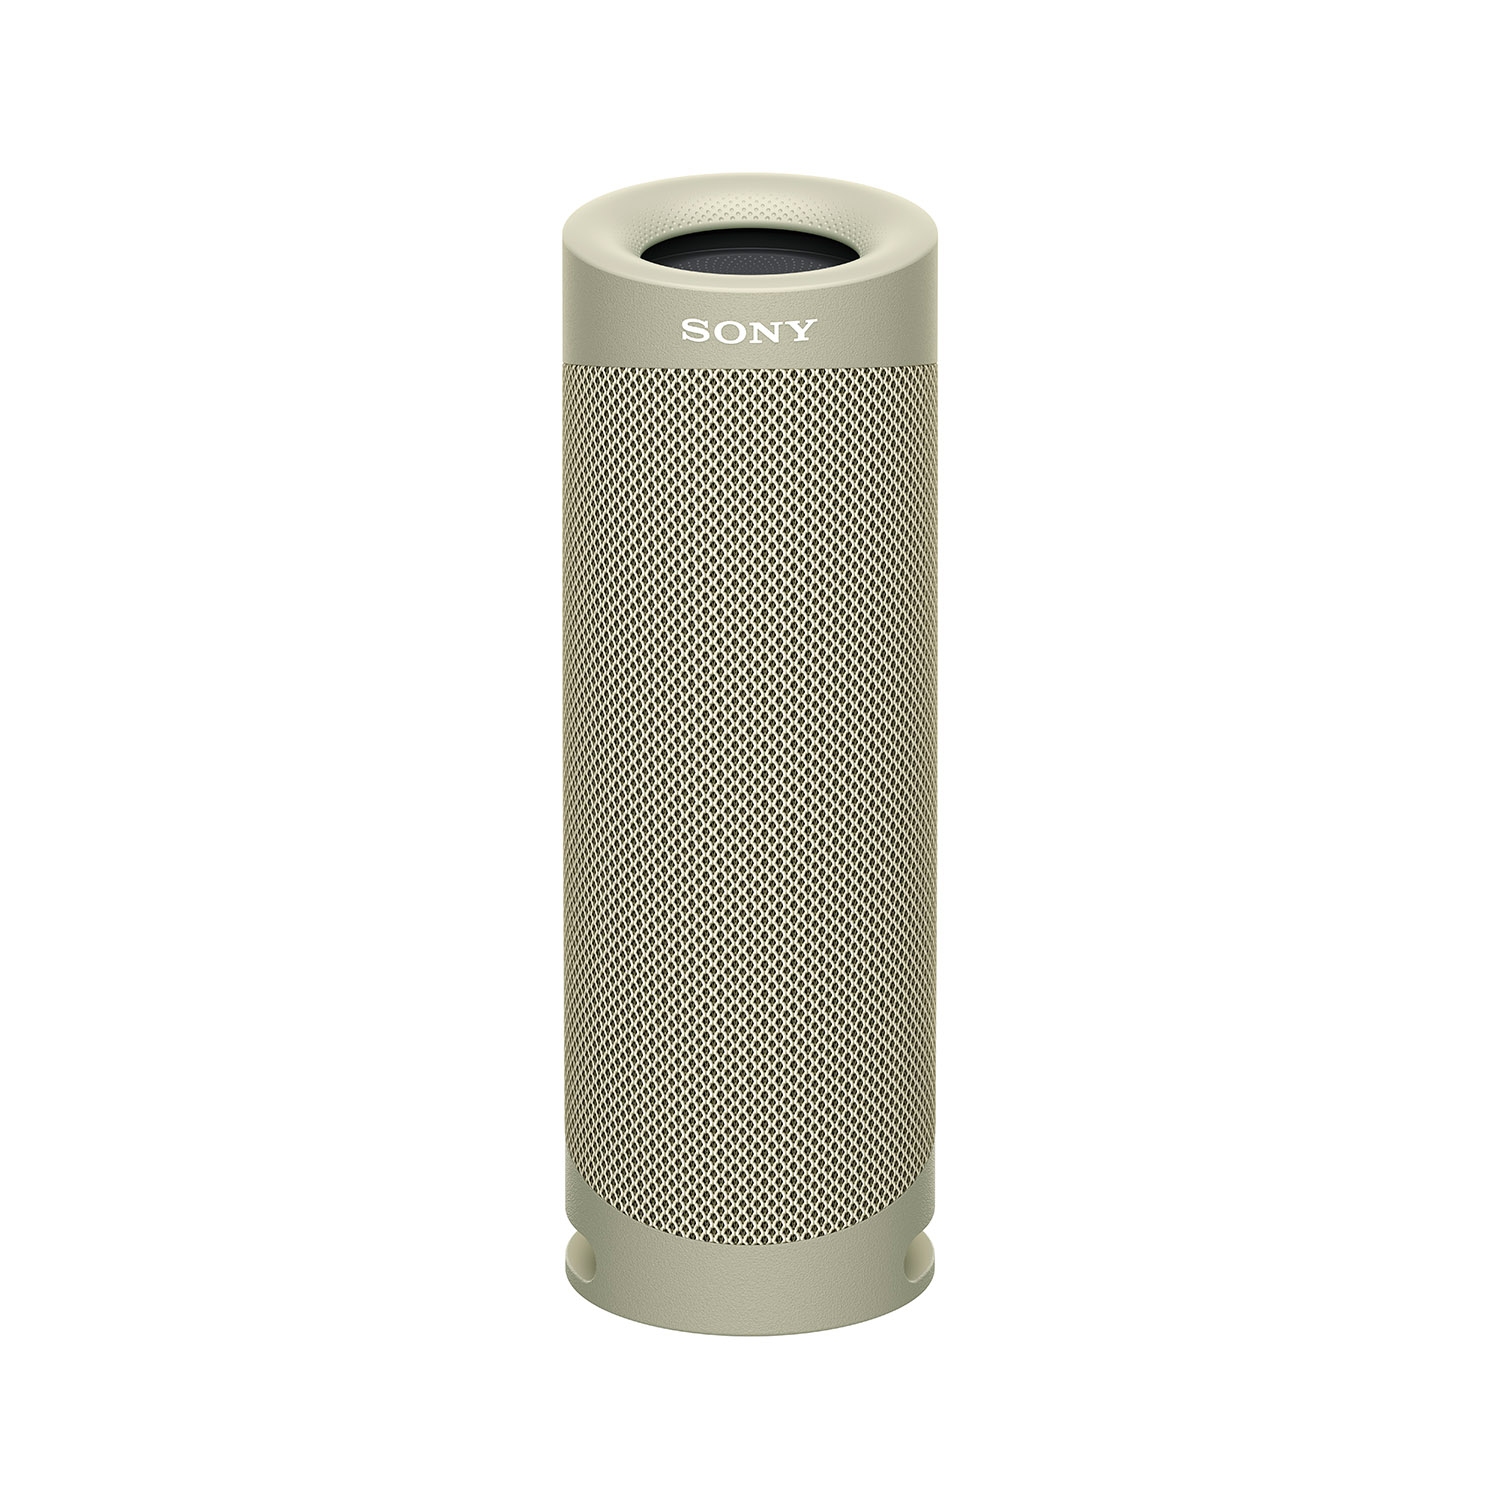 Sony SRSXB23CCE7Portable Wireless Bluetooth Speaker - Taupe - 0